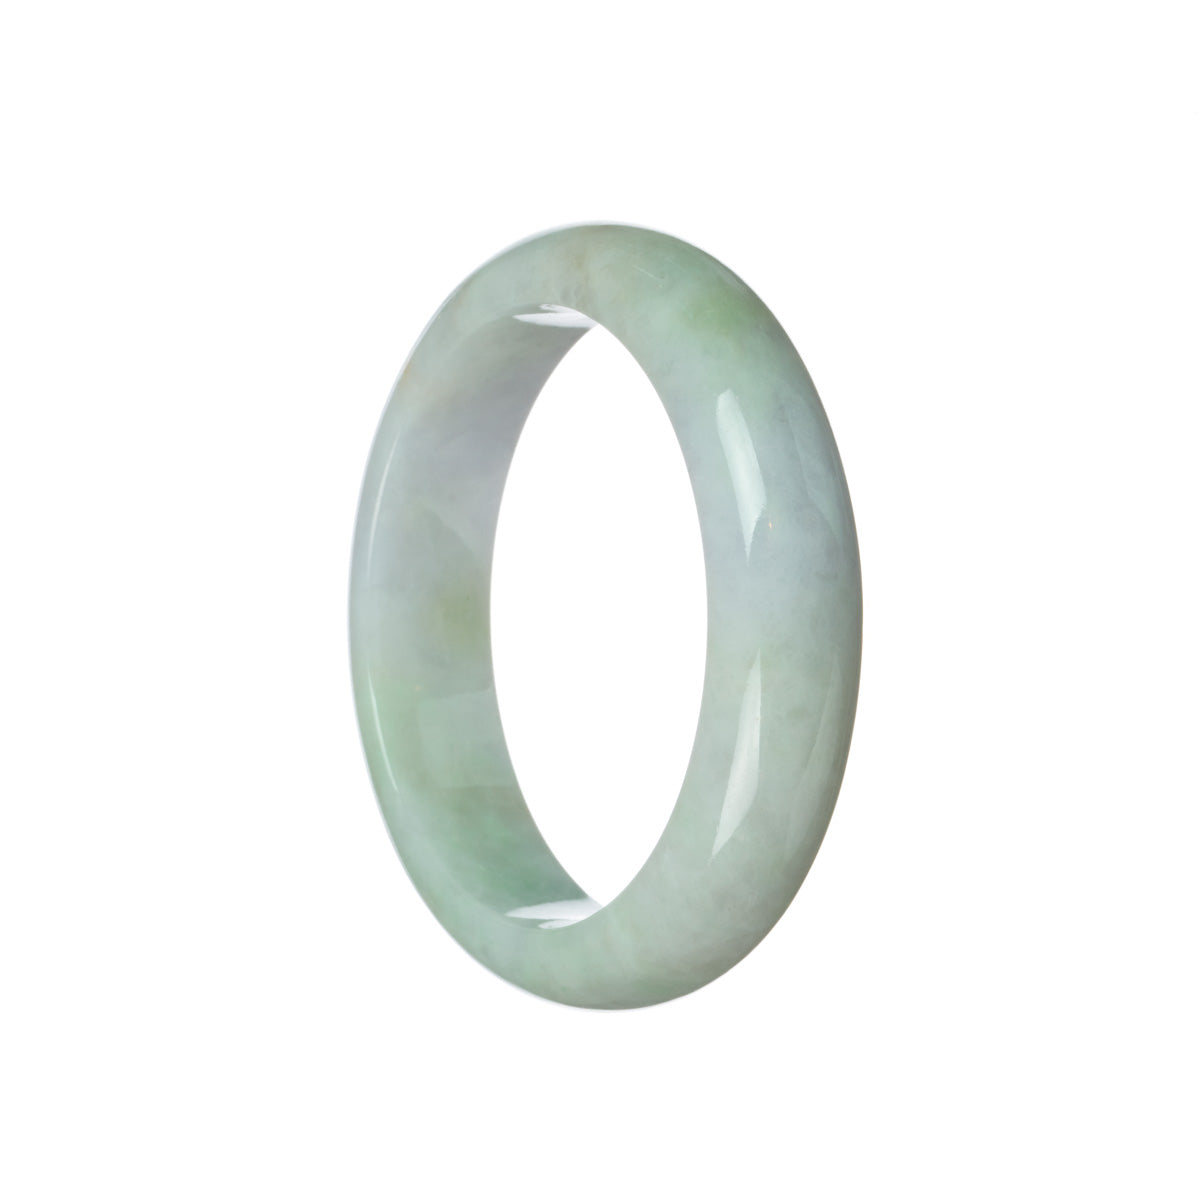 An image of an untreated lavender-colored bangle made with genuine green jadeite. The bangle is in a half-moon shape and has a diameter of 58mm. This bangle is part of the MAYS™ collection.